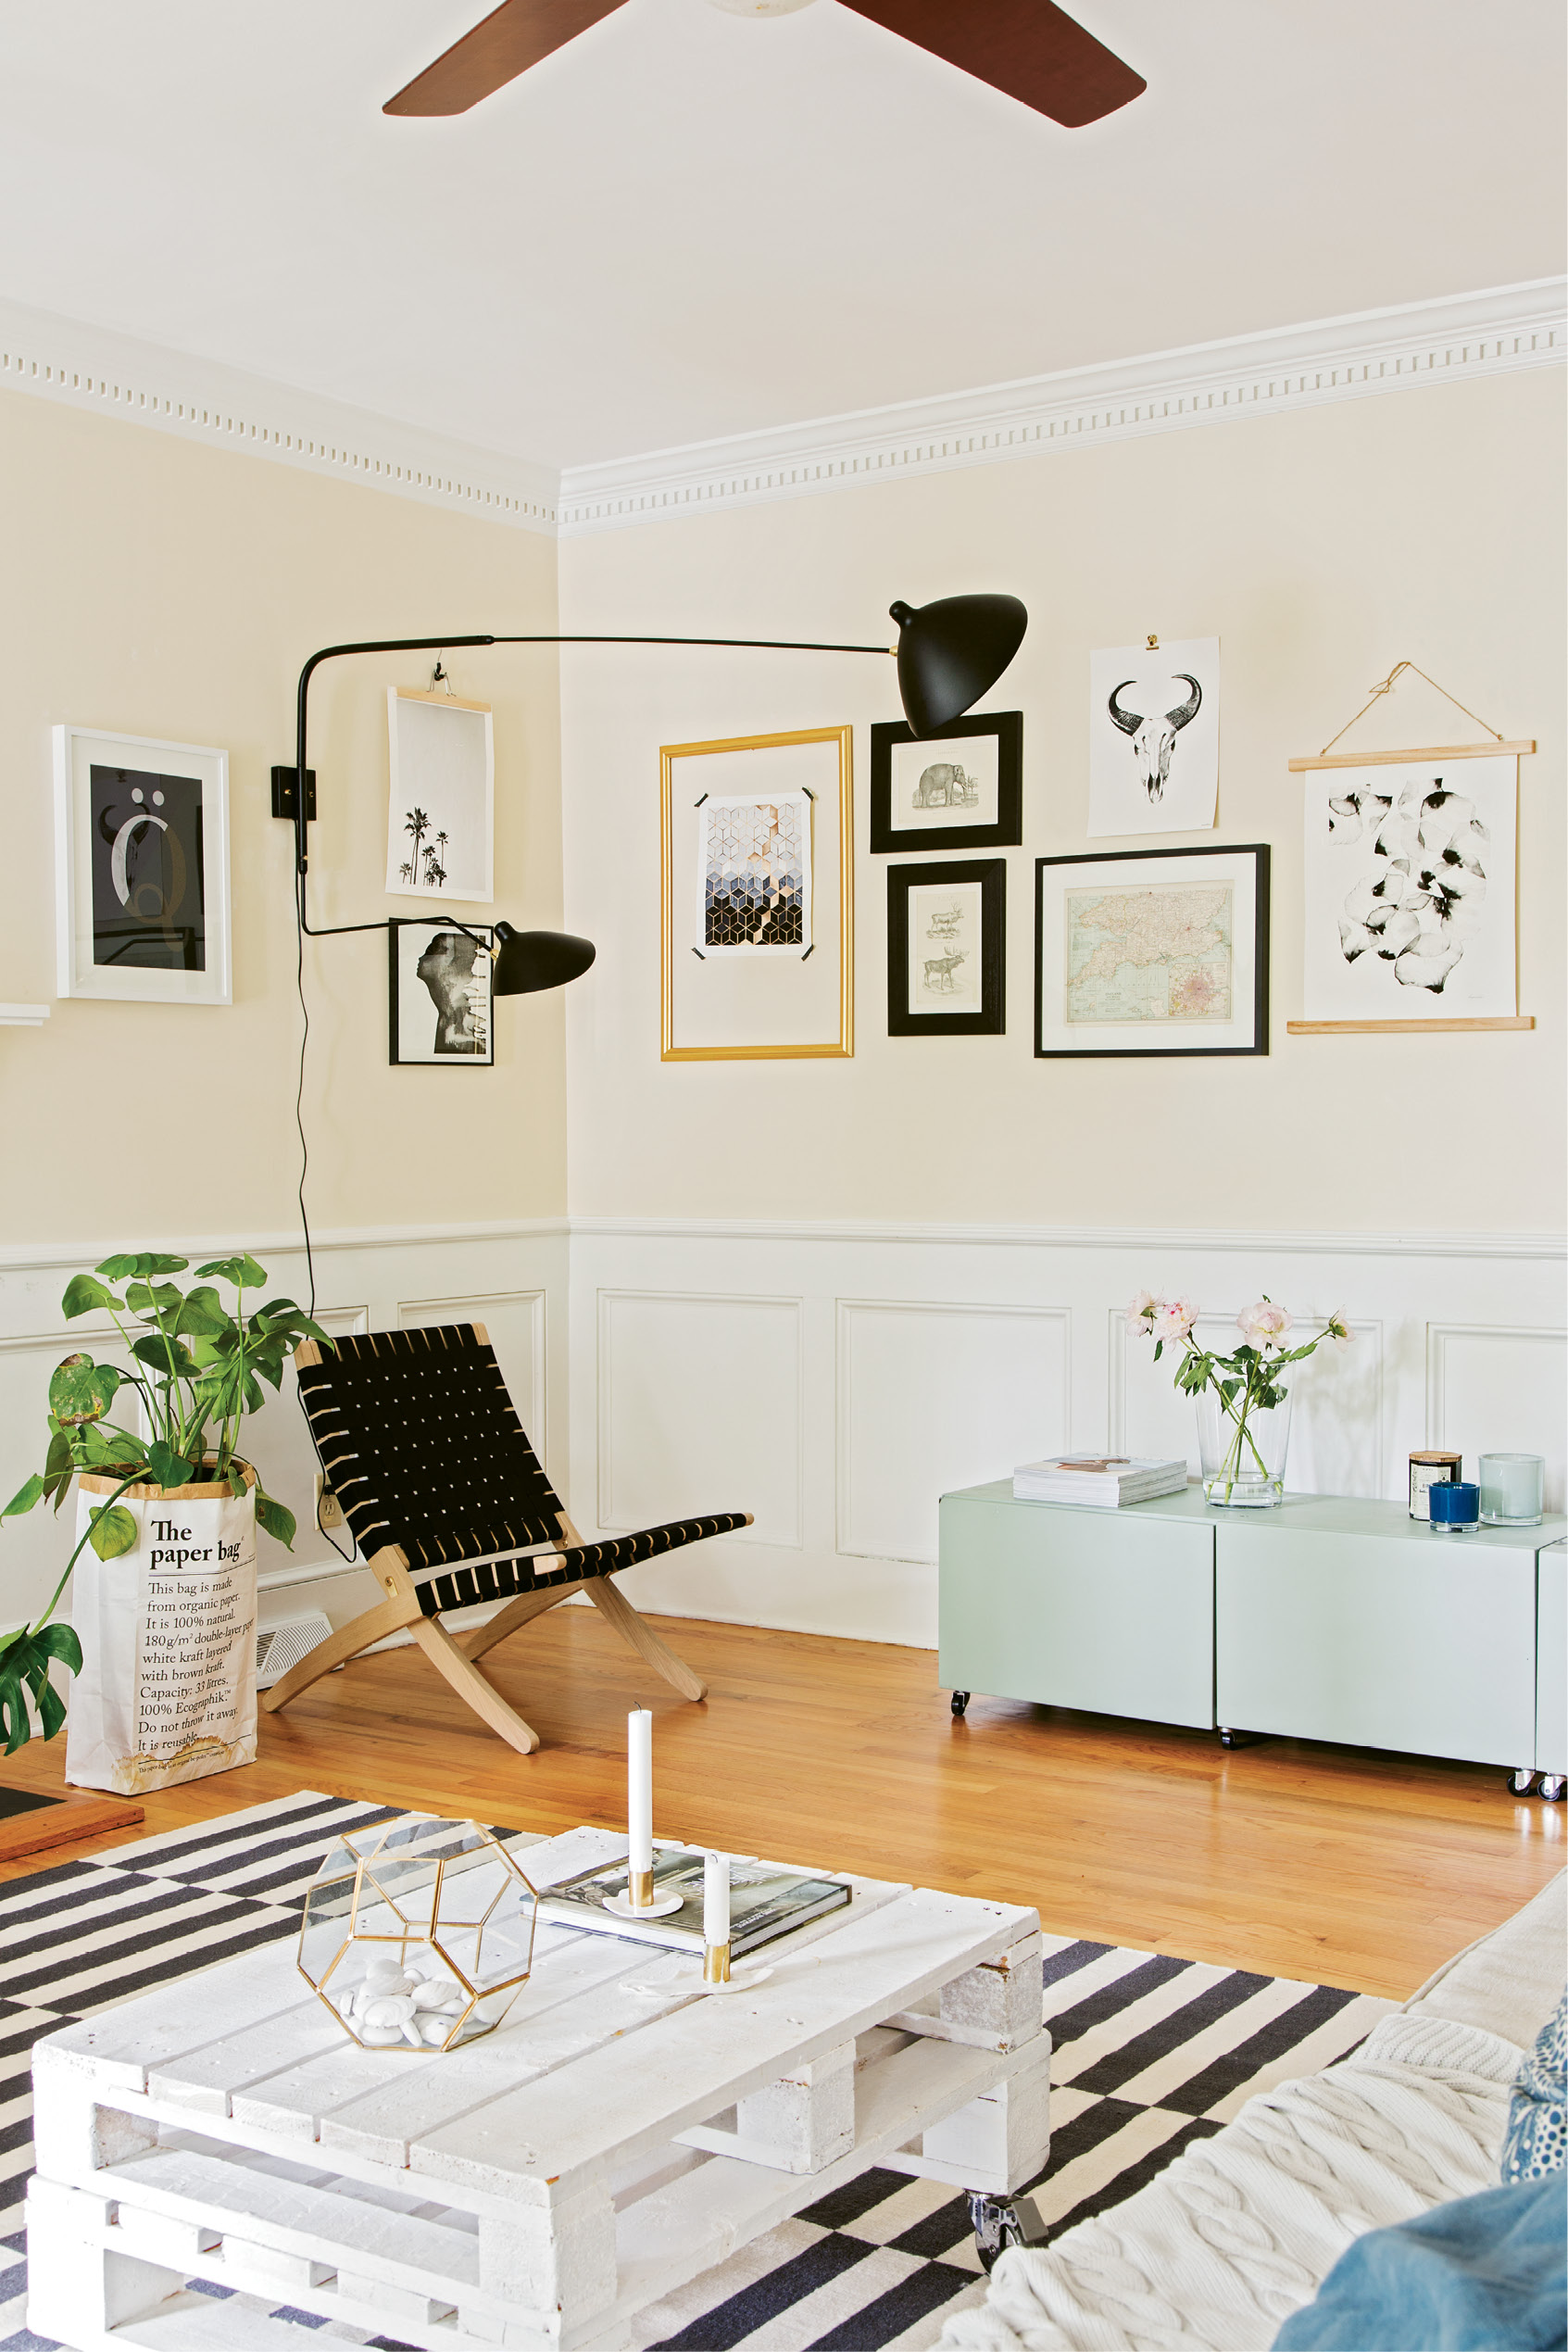 NATIVE STYLE: Therese filled the living room with natural materials, pastel and monochrome color schemes, and lots of plants—all hallmarks of the Swedish design aesthetic. (Opposite top) Gallery walls are found throughout the house; a black-and-white palette connects them all, making the spaces feel cohesive.